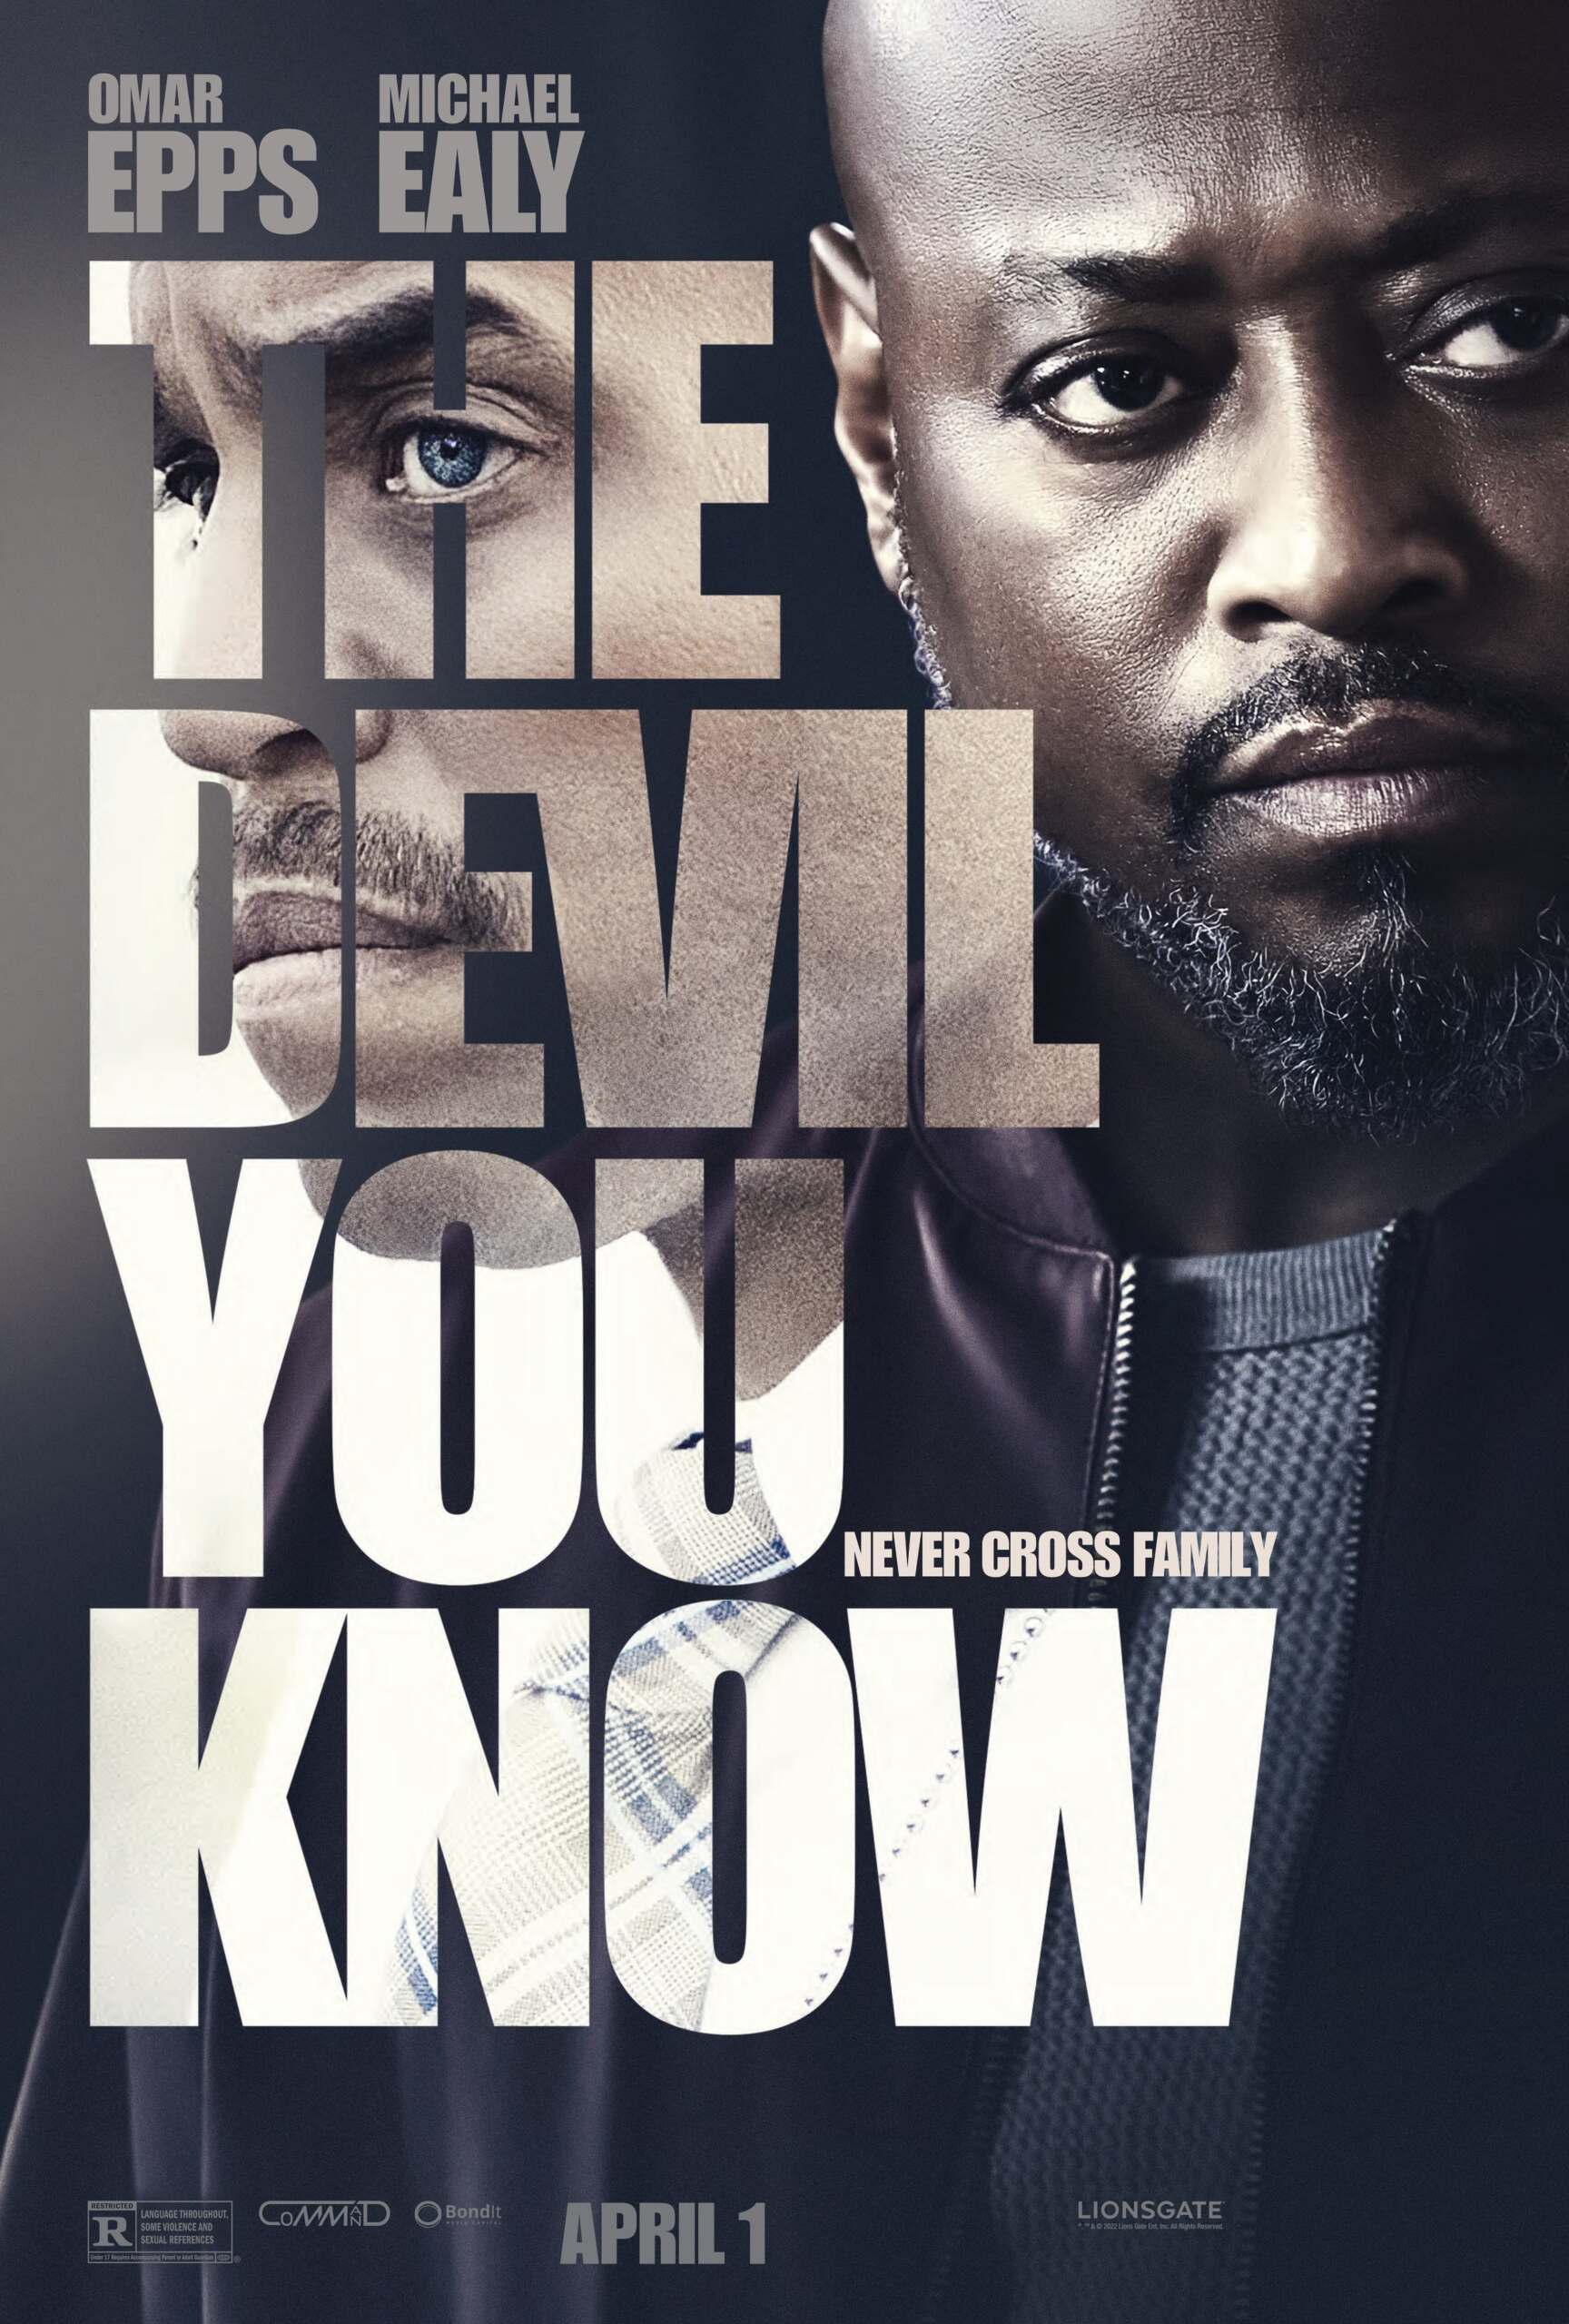 1st Trailer For 'The Devil You Know' Movie Starring Omar Epps & Michael Ealy